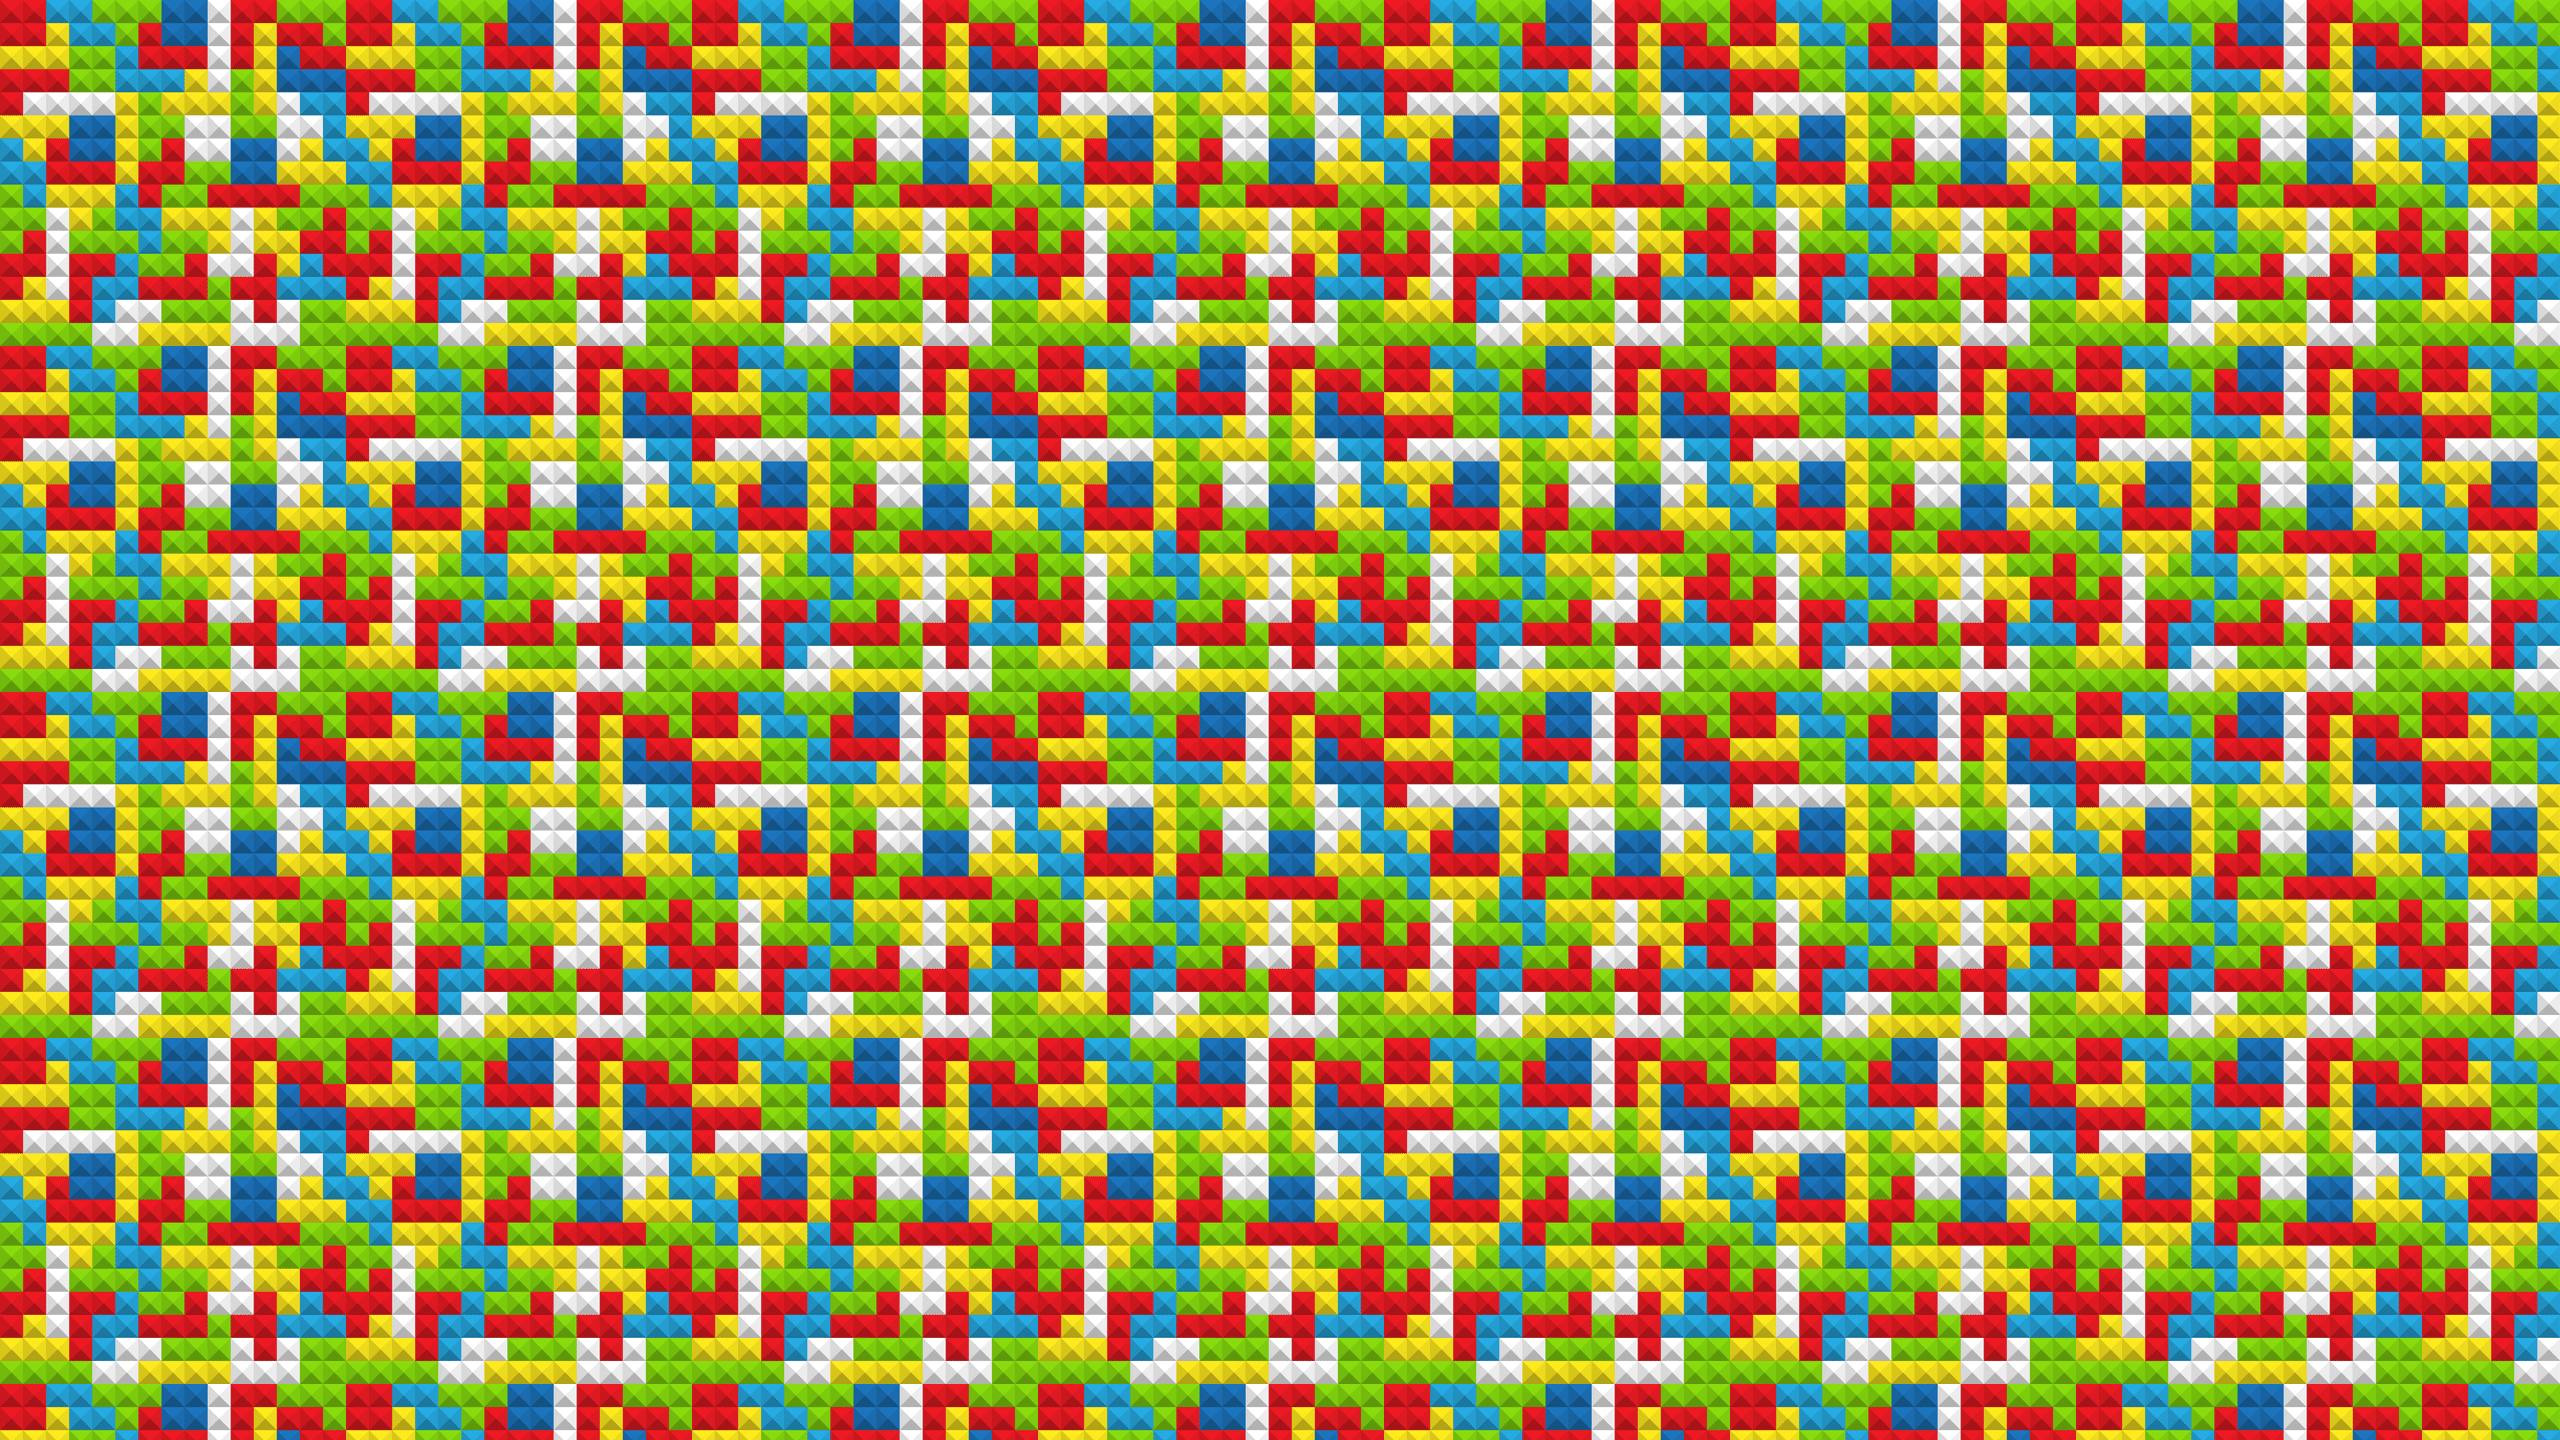 Lego Background Wallpaper On